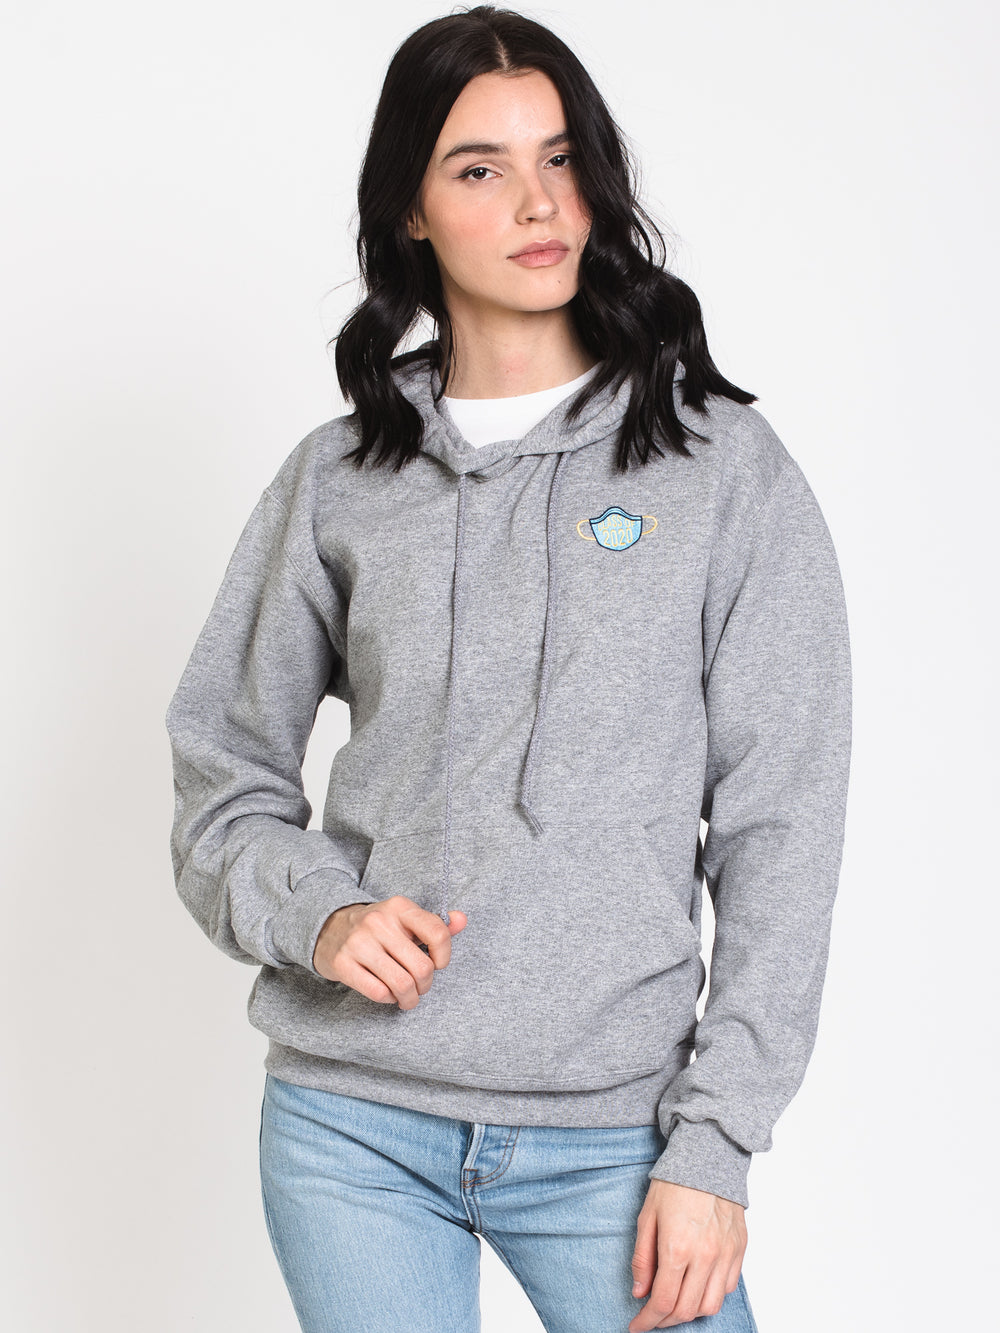 CLASS OF 2020 EMB HOODY - GRY - CLEARANCE